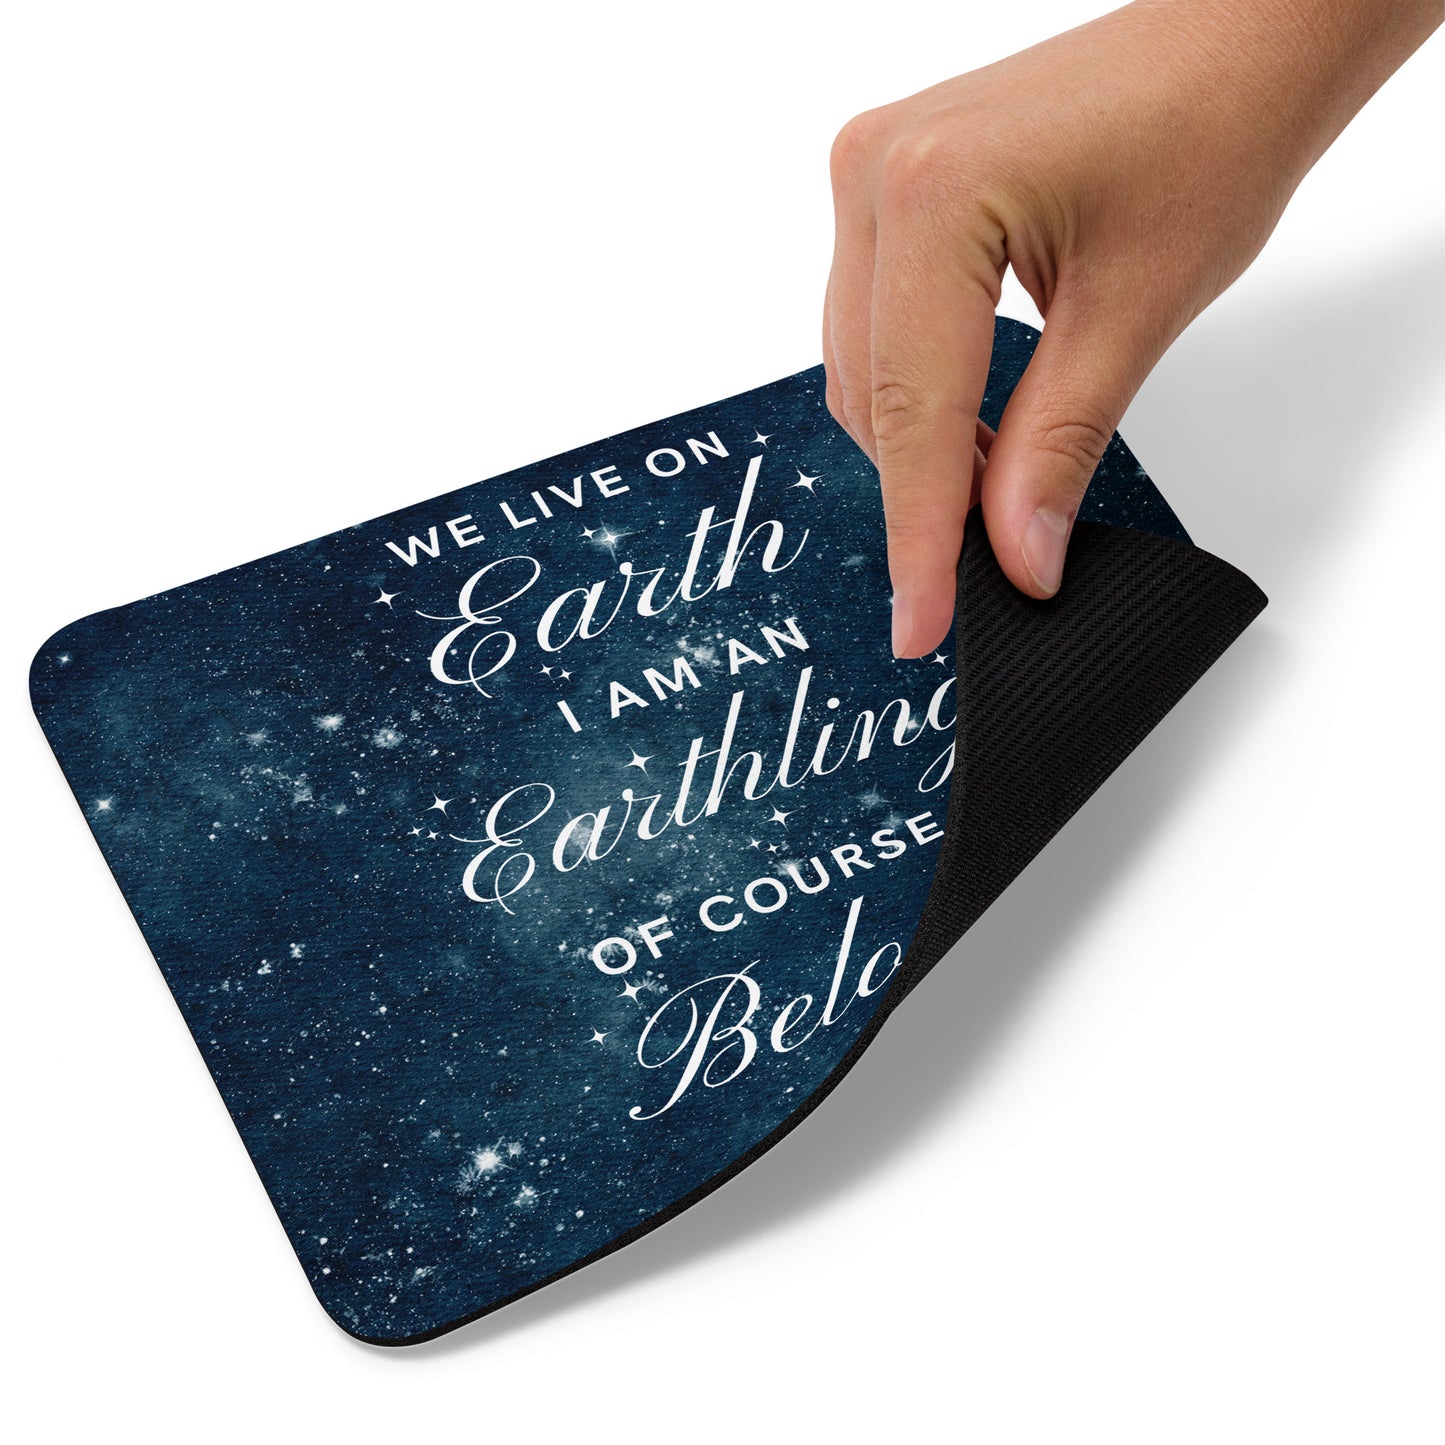 Earthling (I Belong) Inclusive Kindness Mouse Pad